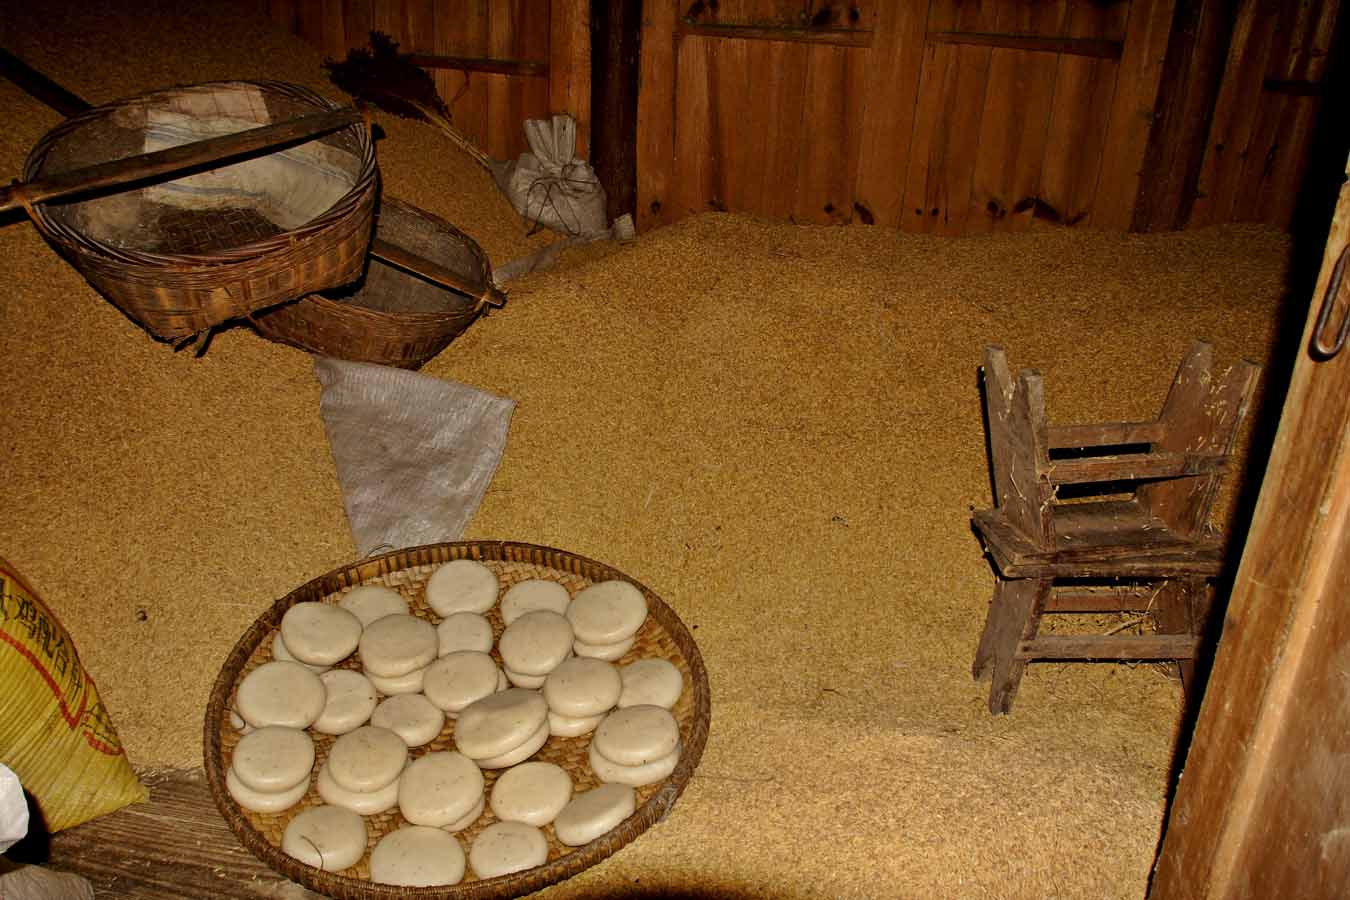 Naox Niex: glutinous rice cakes (sticky rice), traditionally made and eaten during the new year_019.jpg